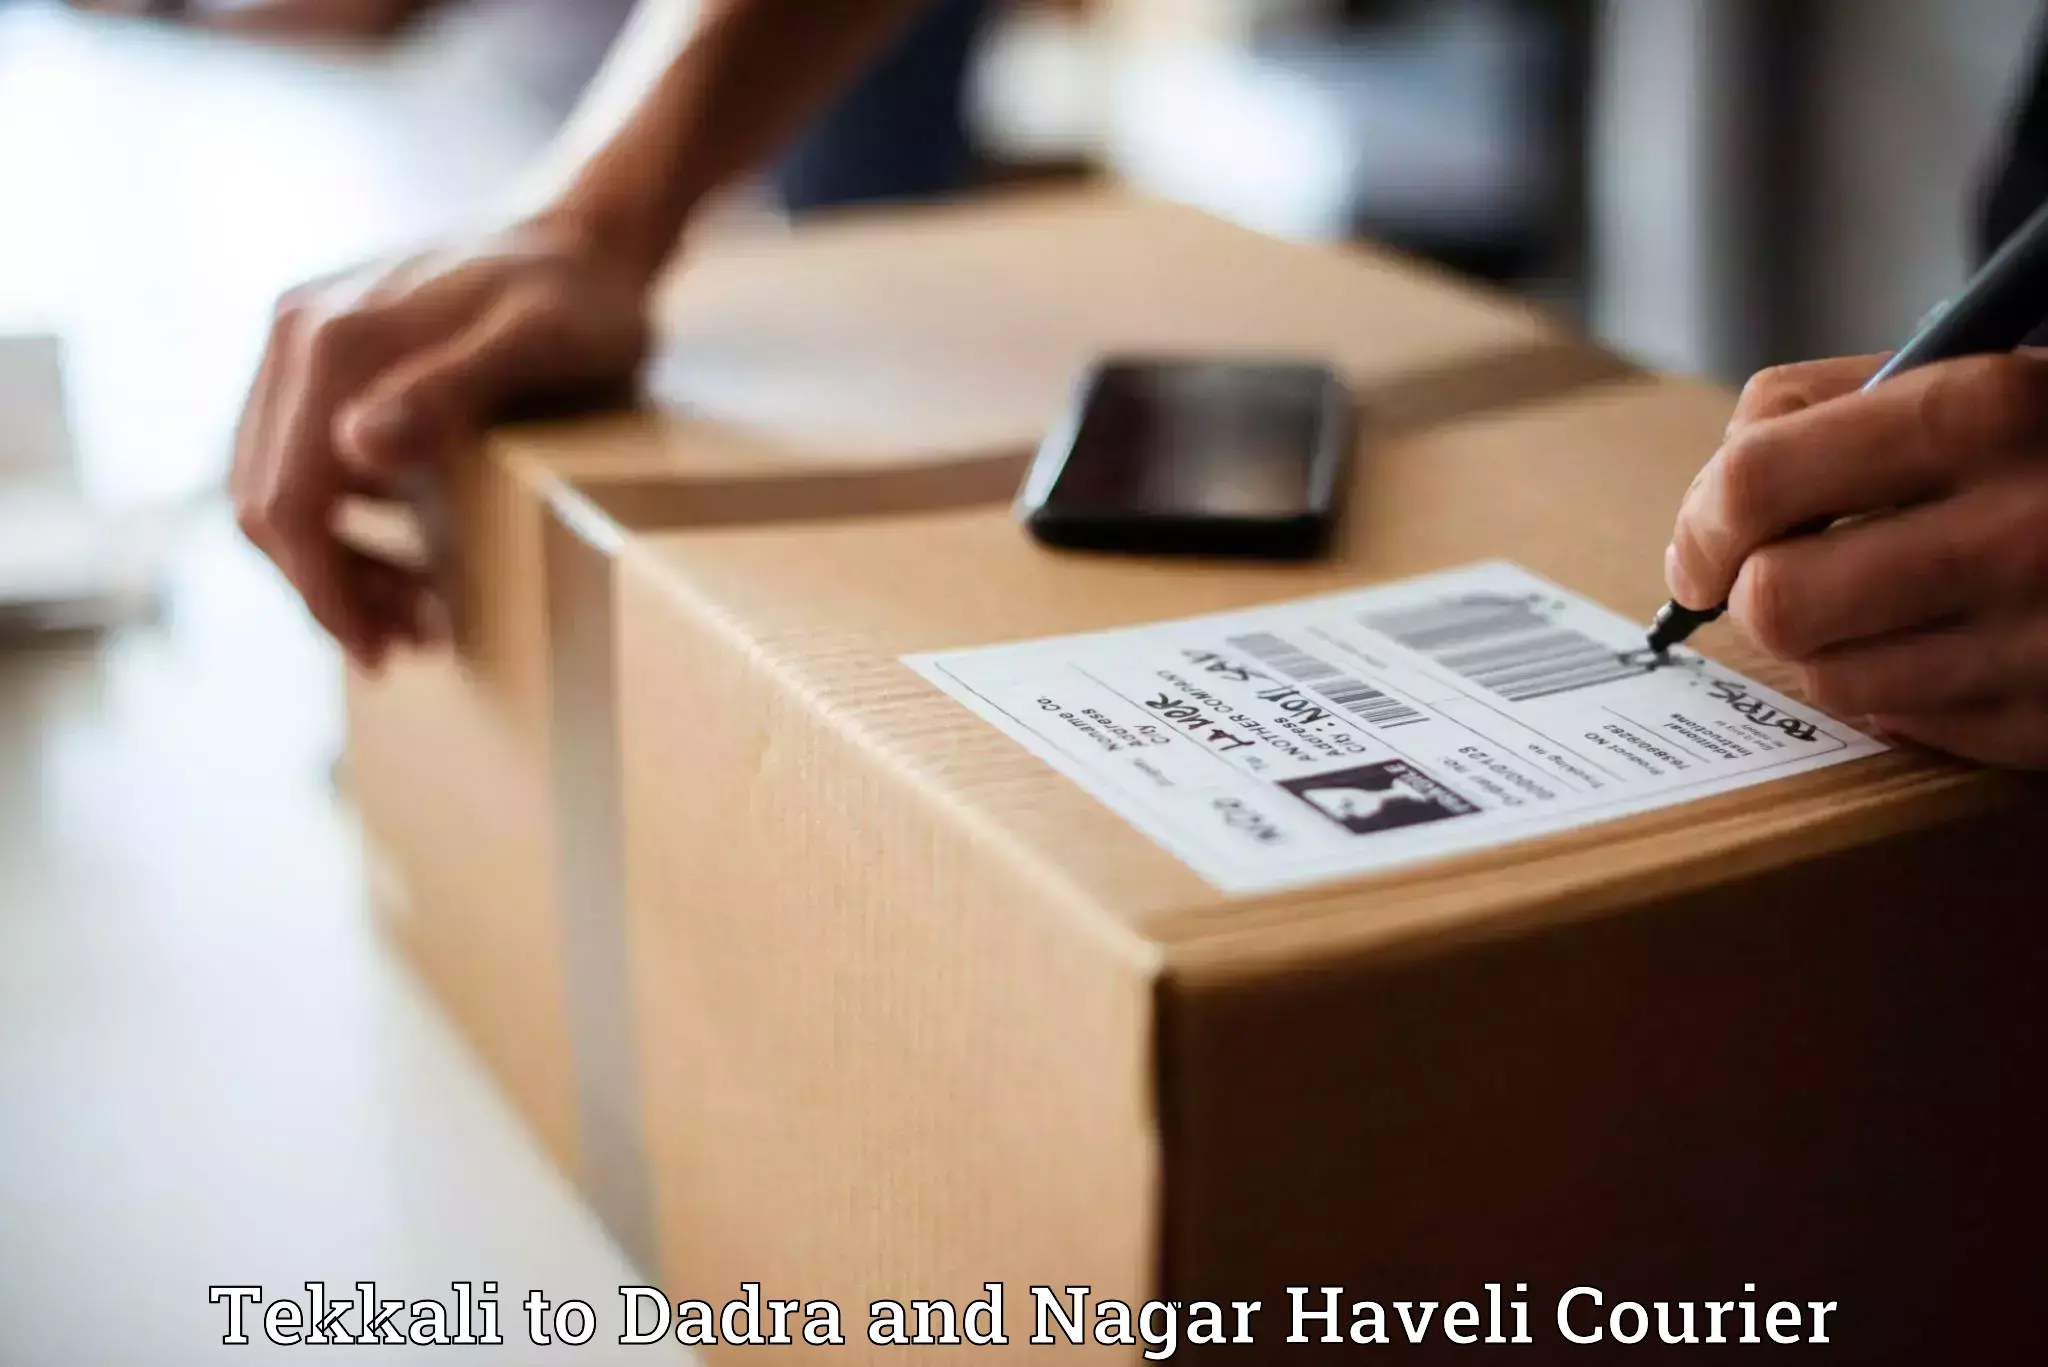 Courier app in Tekkali to Dadra and Nagar Haveli